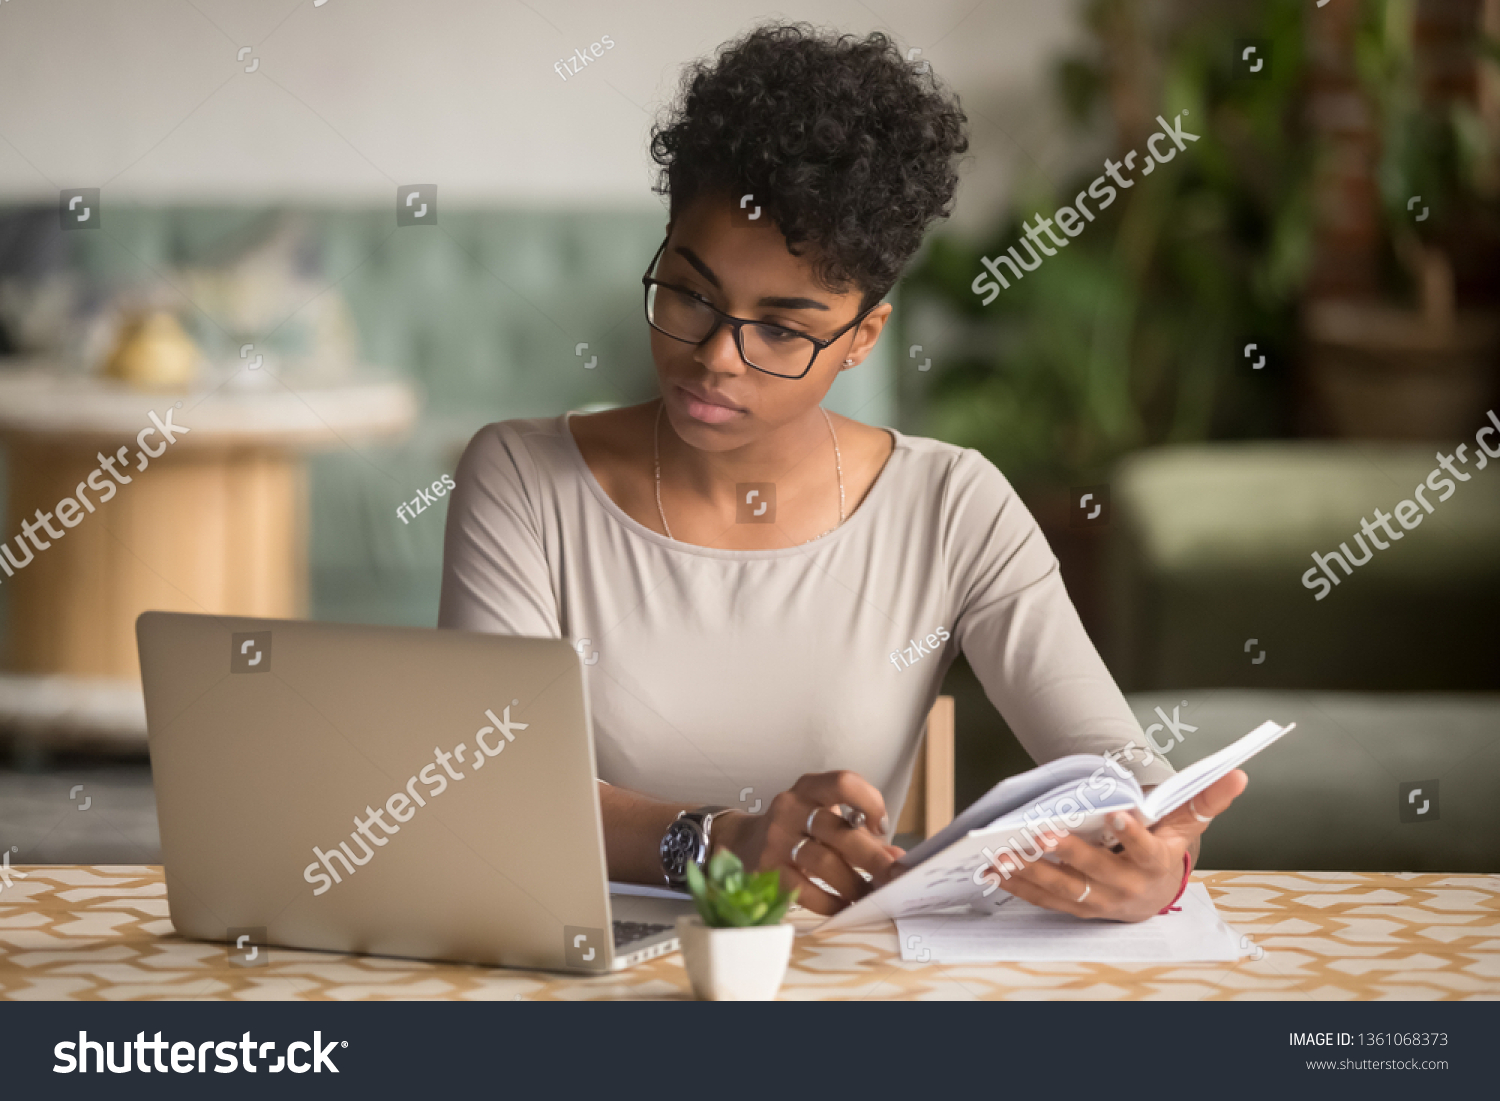 Focused young african american businesswoman or student looking at laptop holding book learning, serious black woman working or studying with computer doing research or preparing for exam online #1361068373